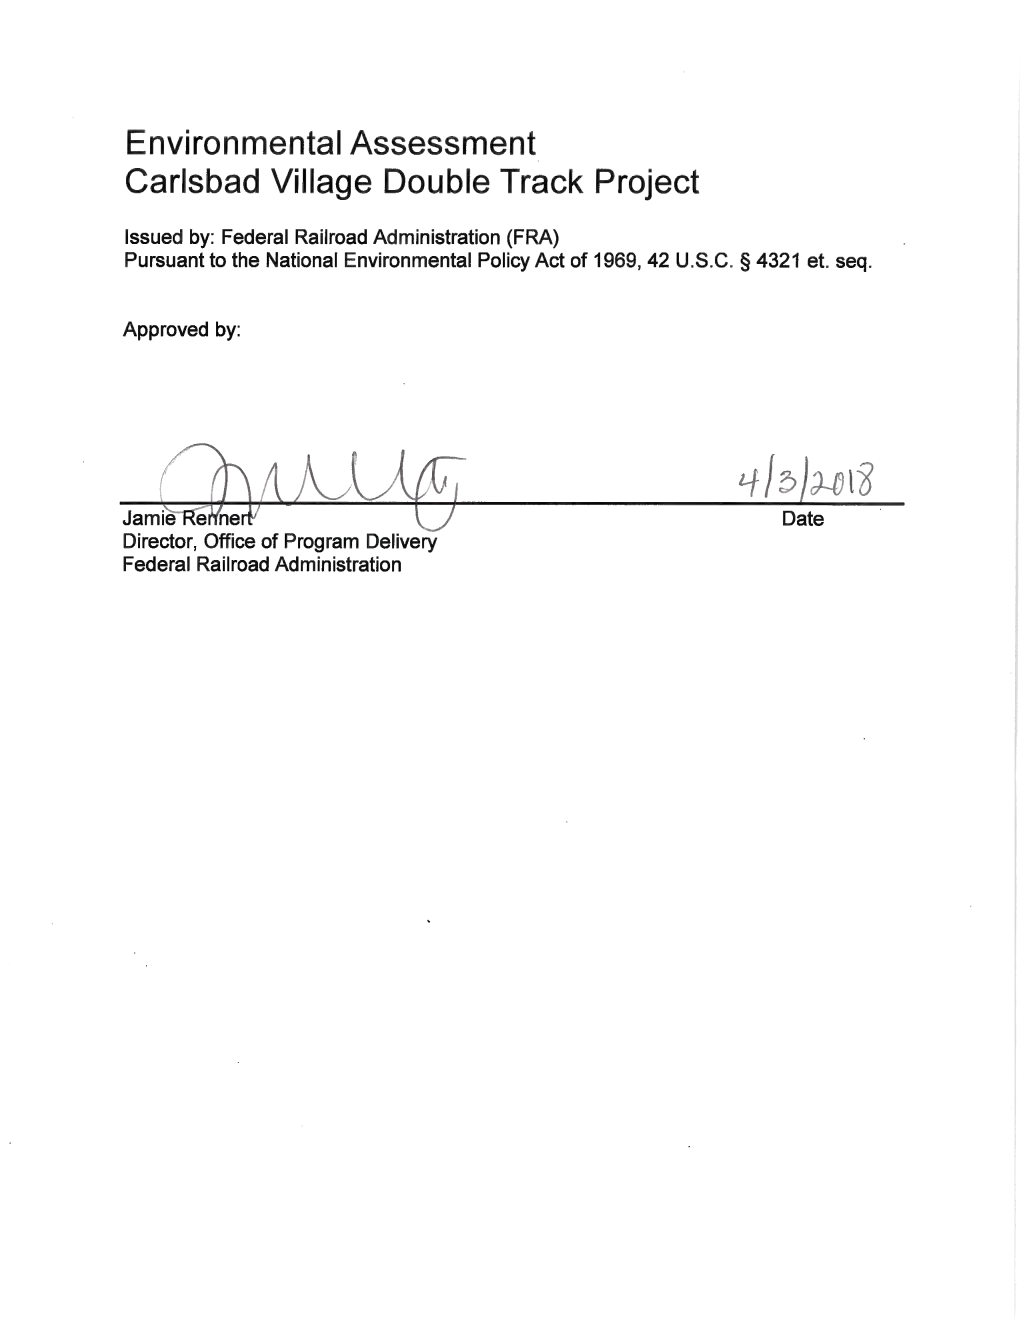 Carlsbad Village Double Track Project Environmental Assessment